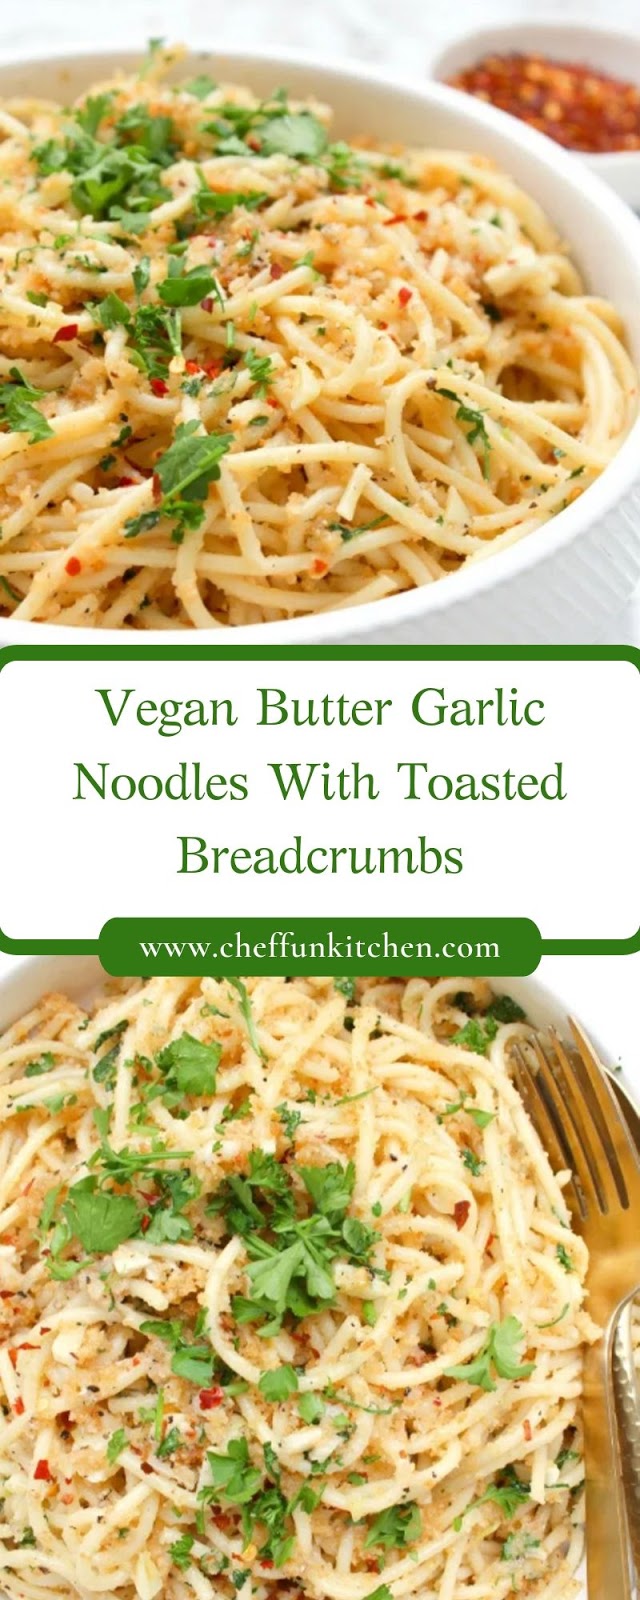 Vegan Butter Garlic Noodles With Toasted Breadcrumbs